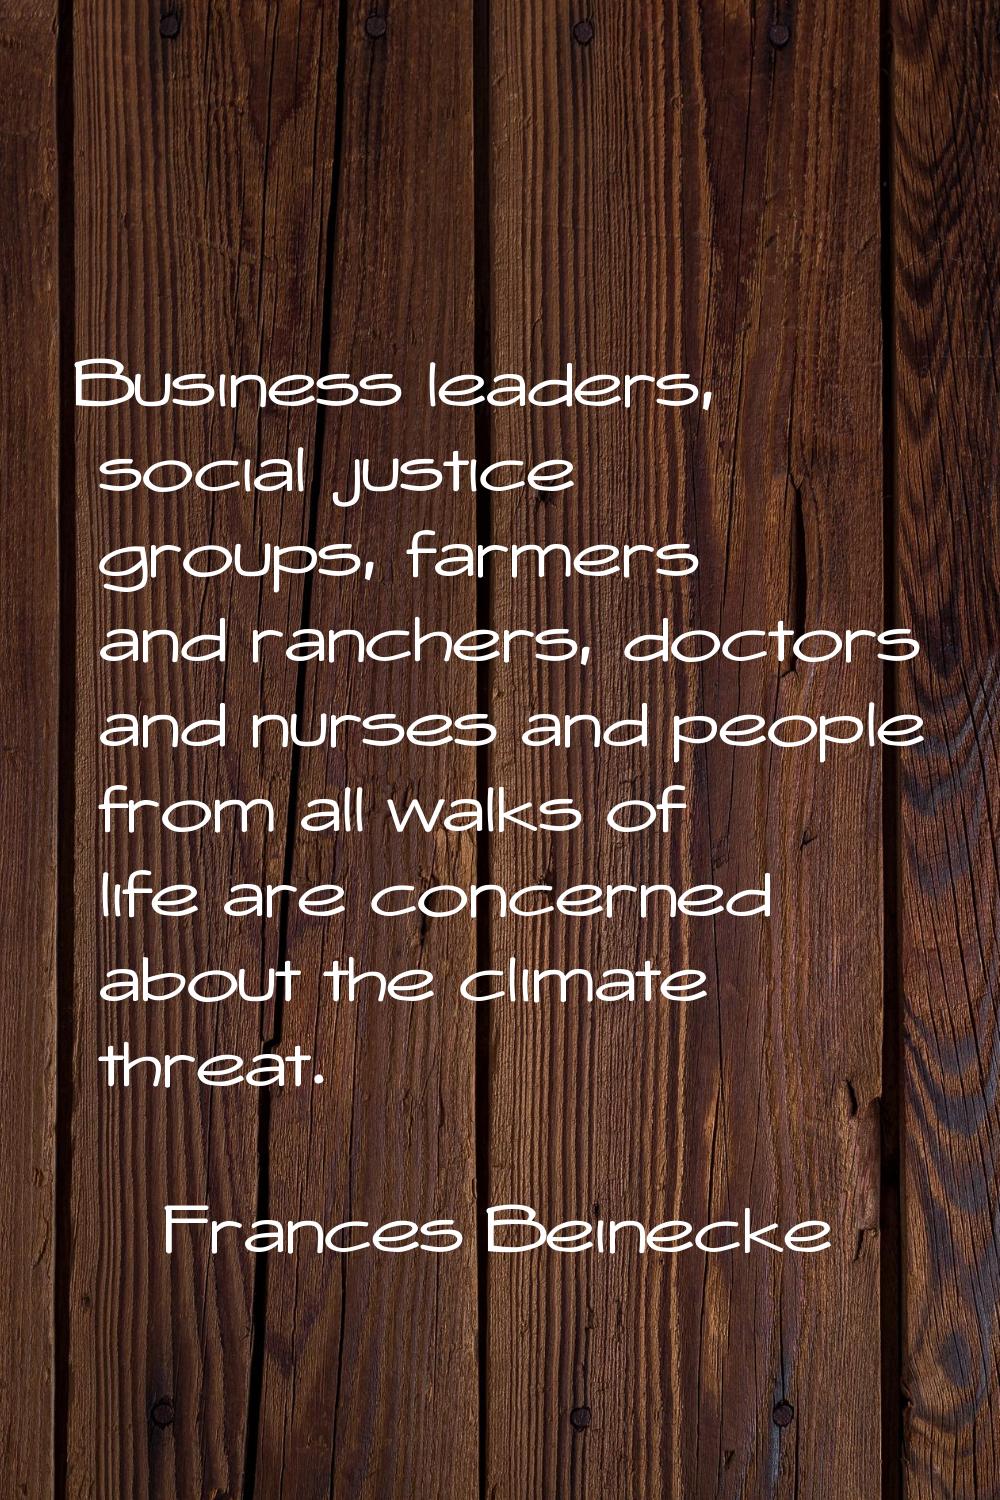 Business leaders, social justice groups, farmers and ranchers, doctors and nurses and people from a